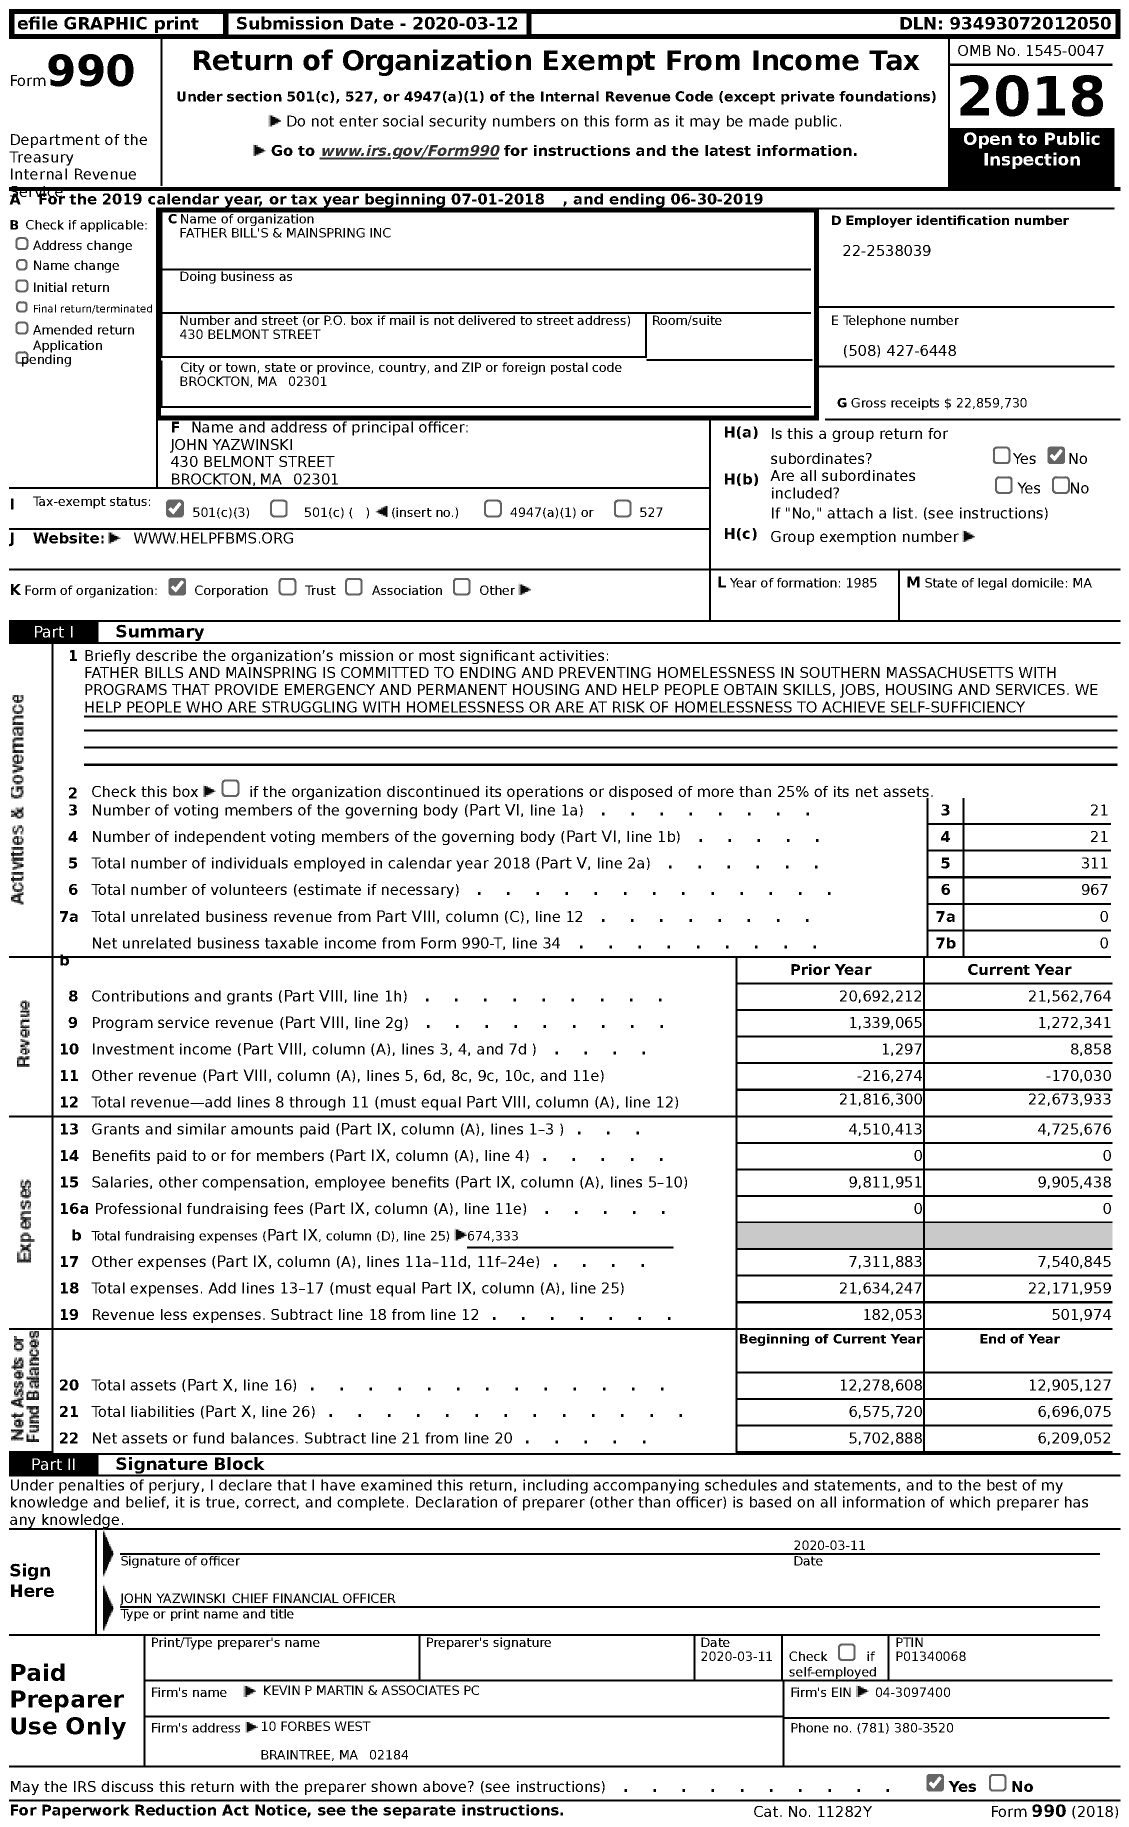 Image of first page of 2018 Form 990 for Father Bills & MainSpring (FBMS)